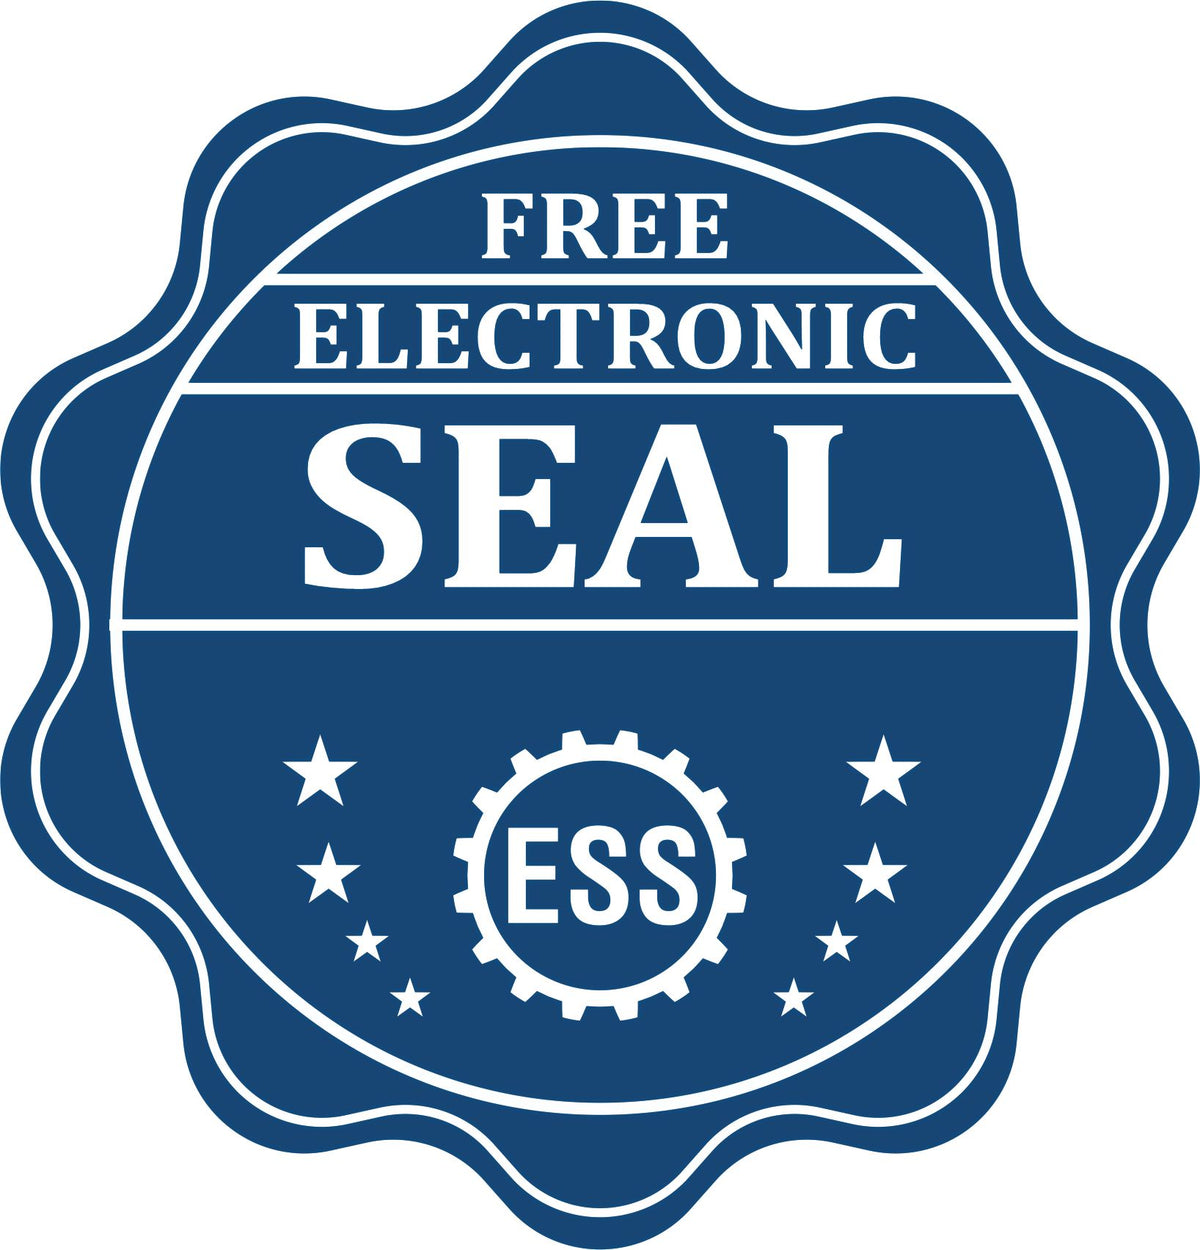 A badge showing a free electronic seal for the PSI Illinois Notary Stamp with stars and the ESS gear on the emblem.